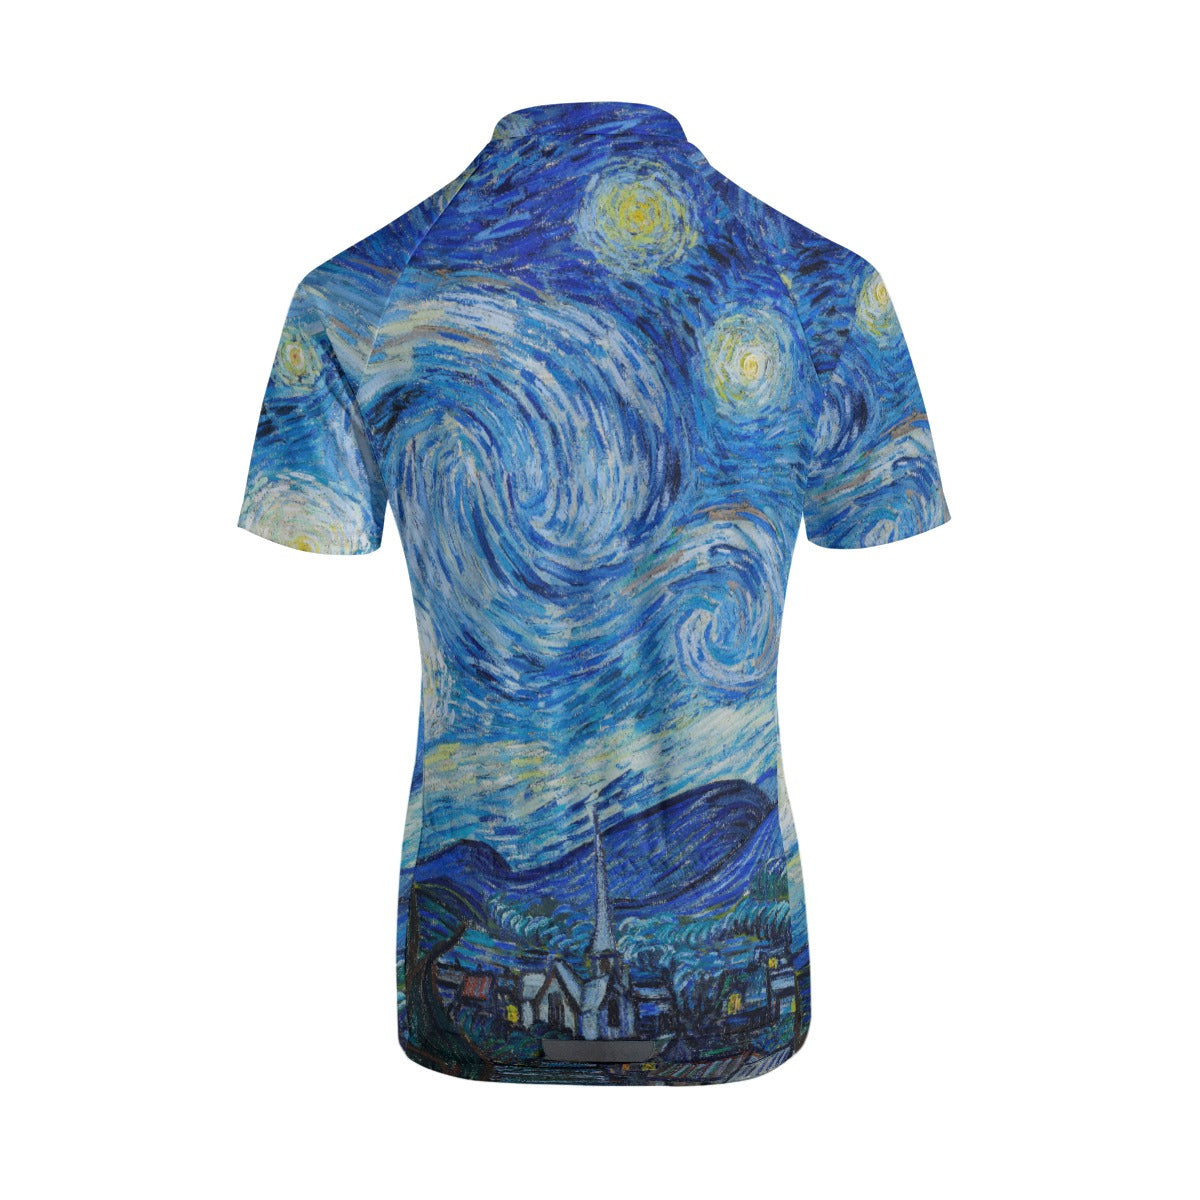 Close-up of Celestial Print on Women's Cycling Apparel